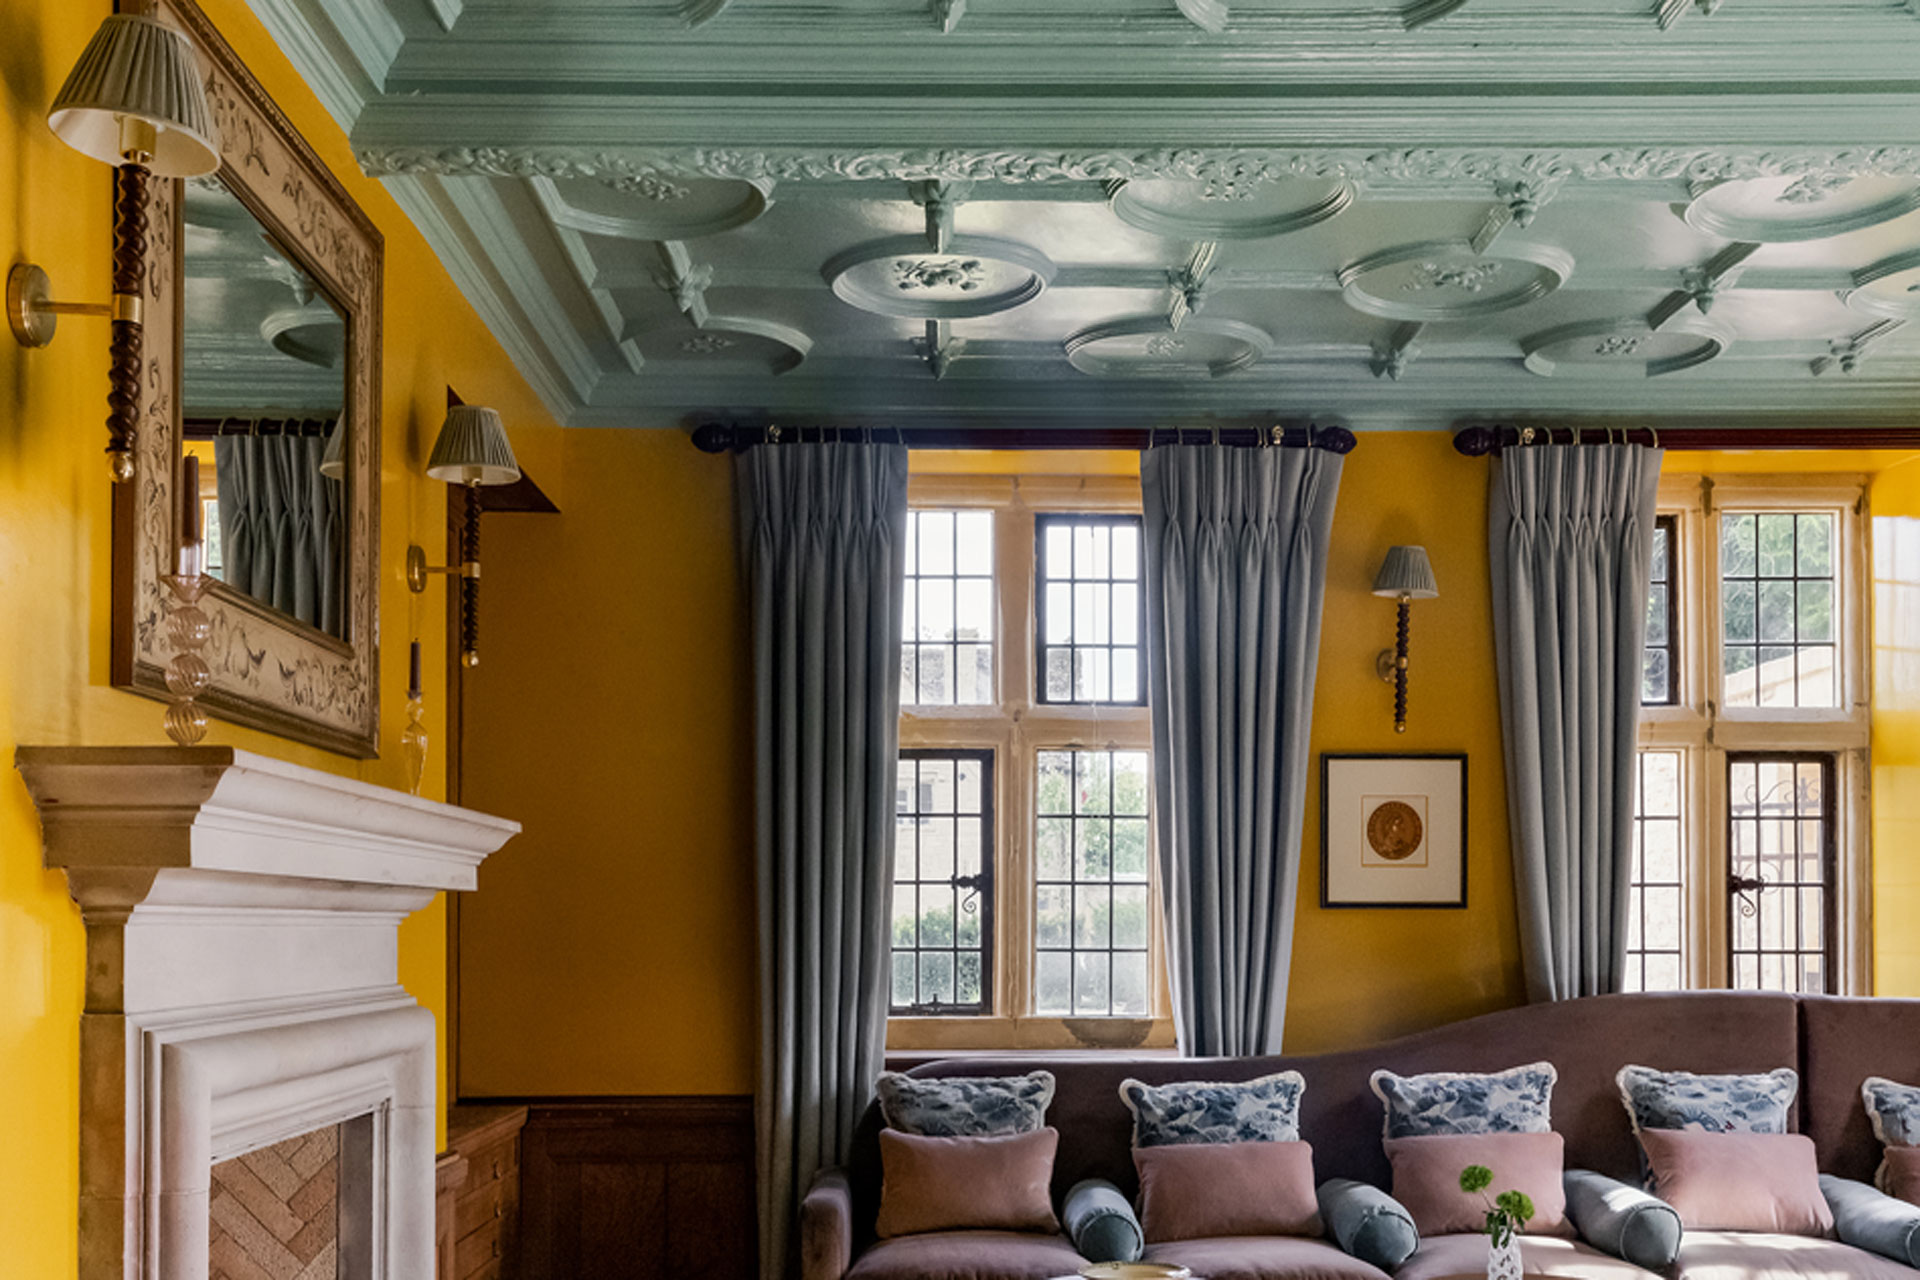 The living room of Kin House, with a green ceiling, yellow walls, and it's designed by Barlow & Barlow